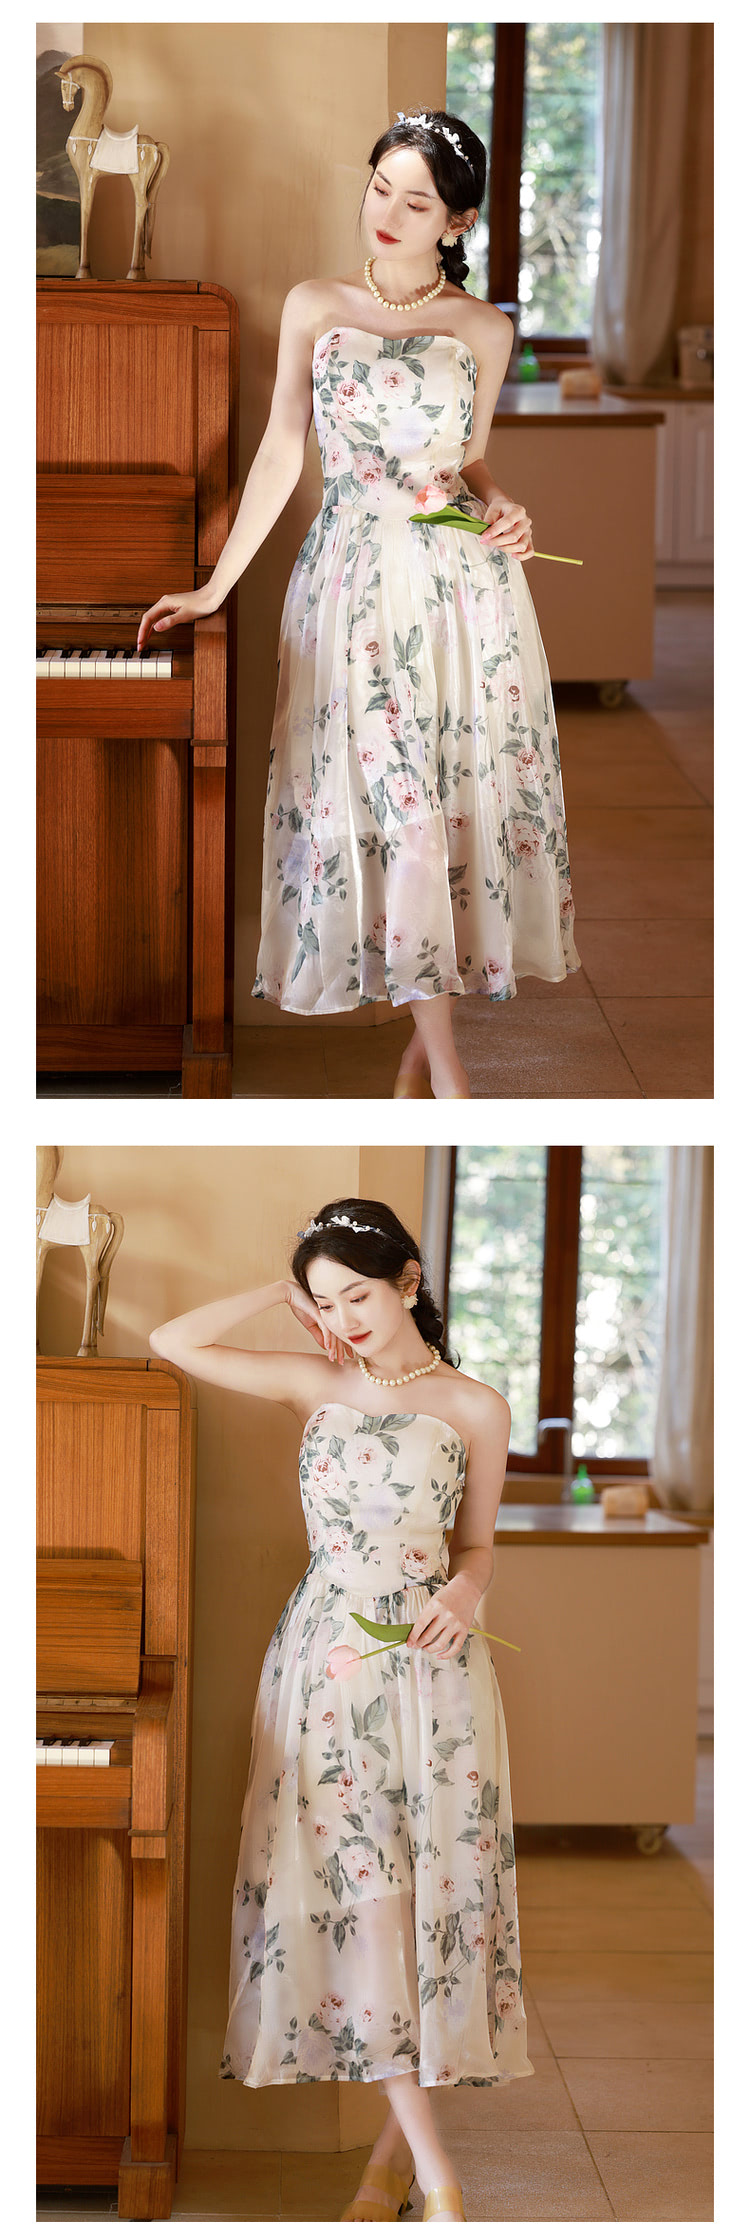 Aesthetic-A-Line-Floral-Printed-Summer-Casual-Slip-Maxi-Dress17.jpg